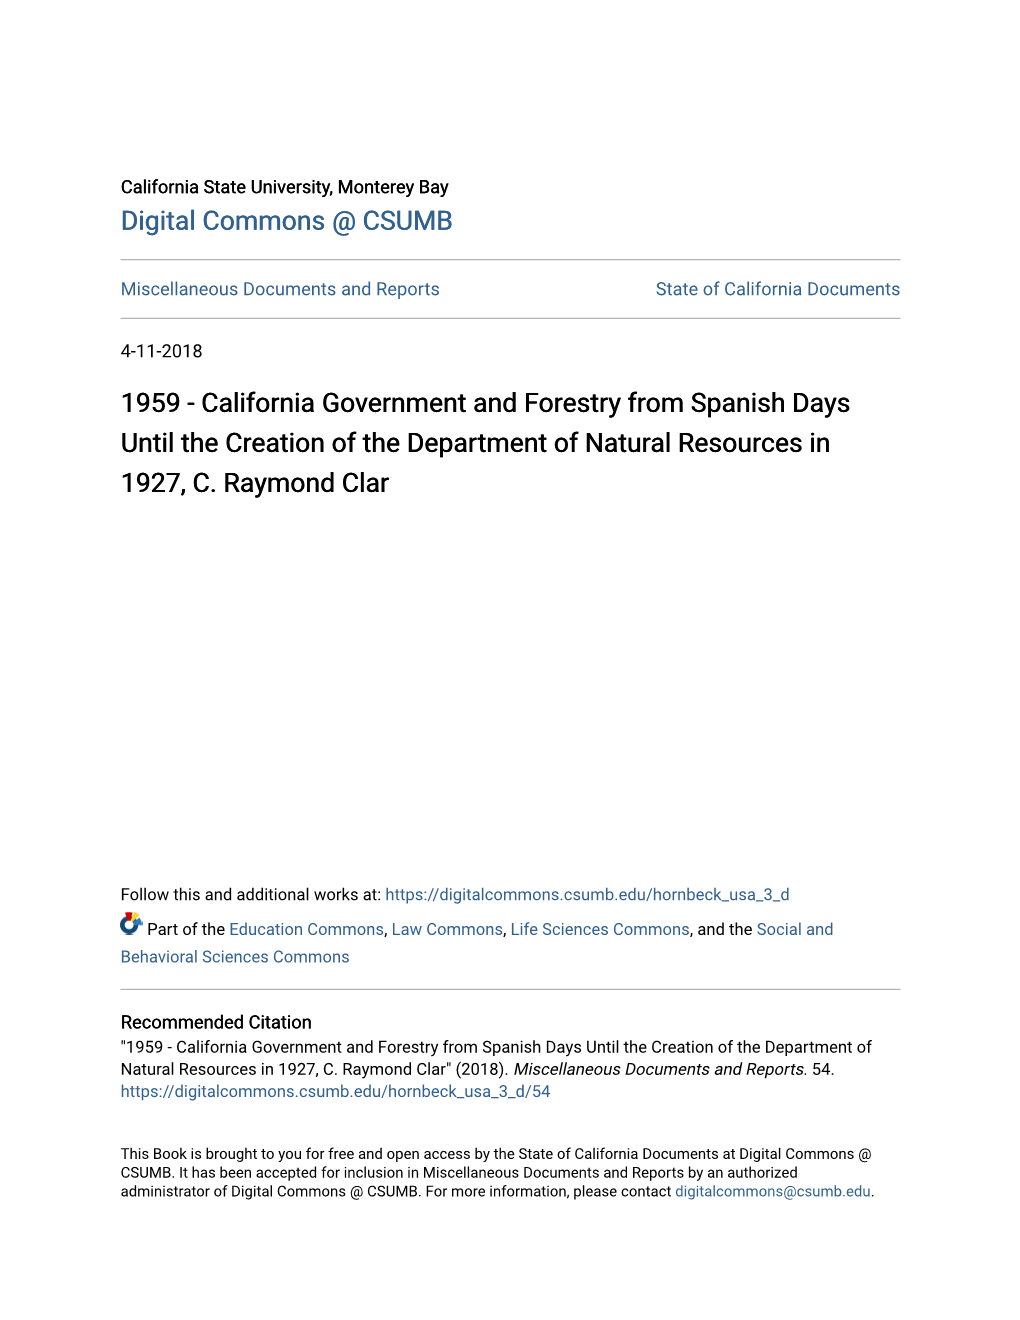 California Government and Forestry from Spanish Days Until the Creation of the Department of Natural Resources in 1927, C